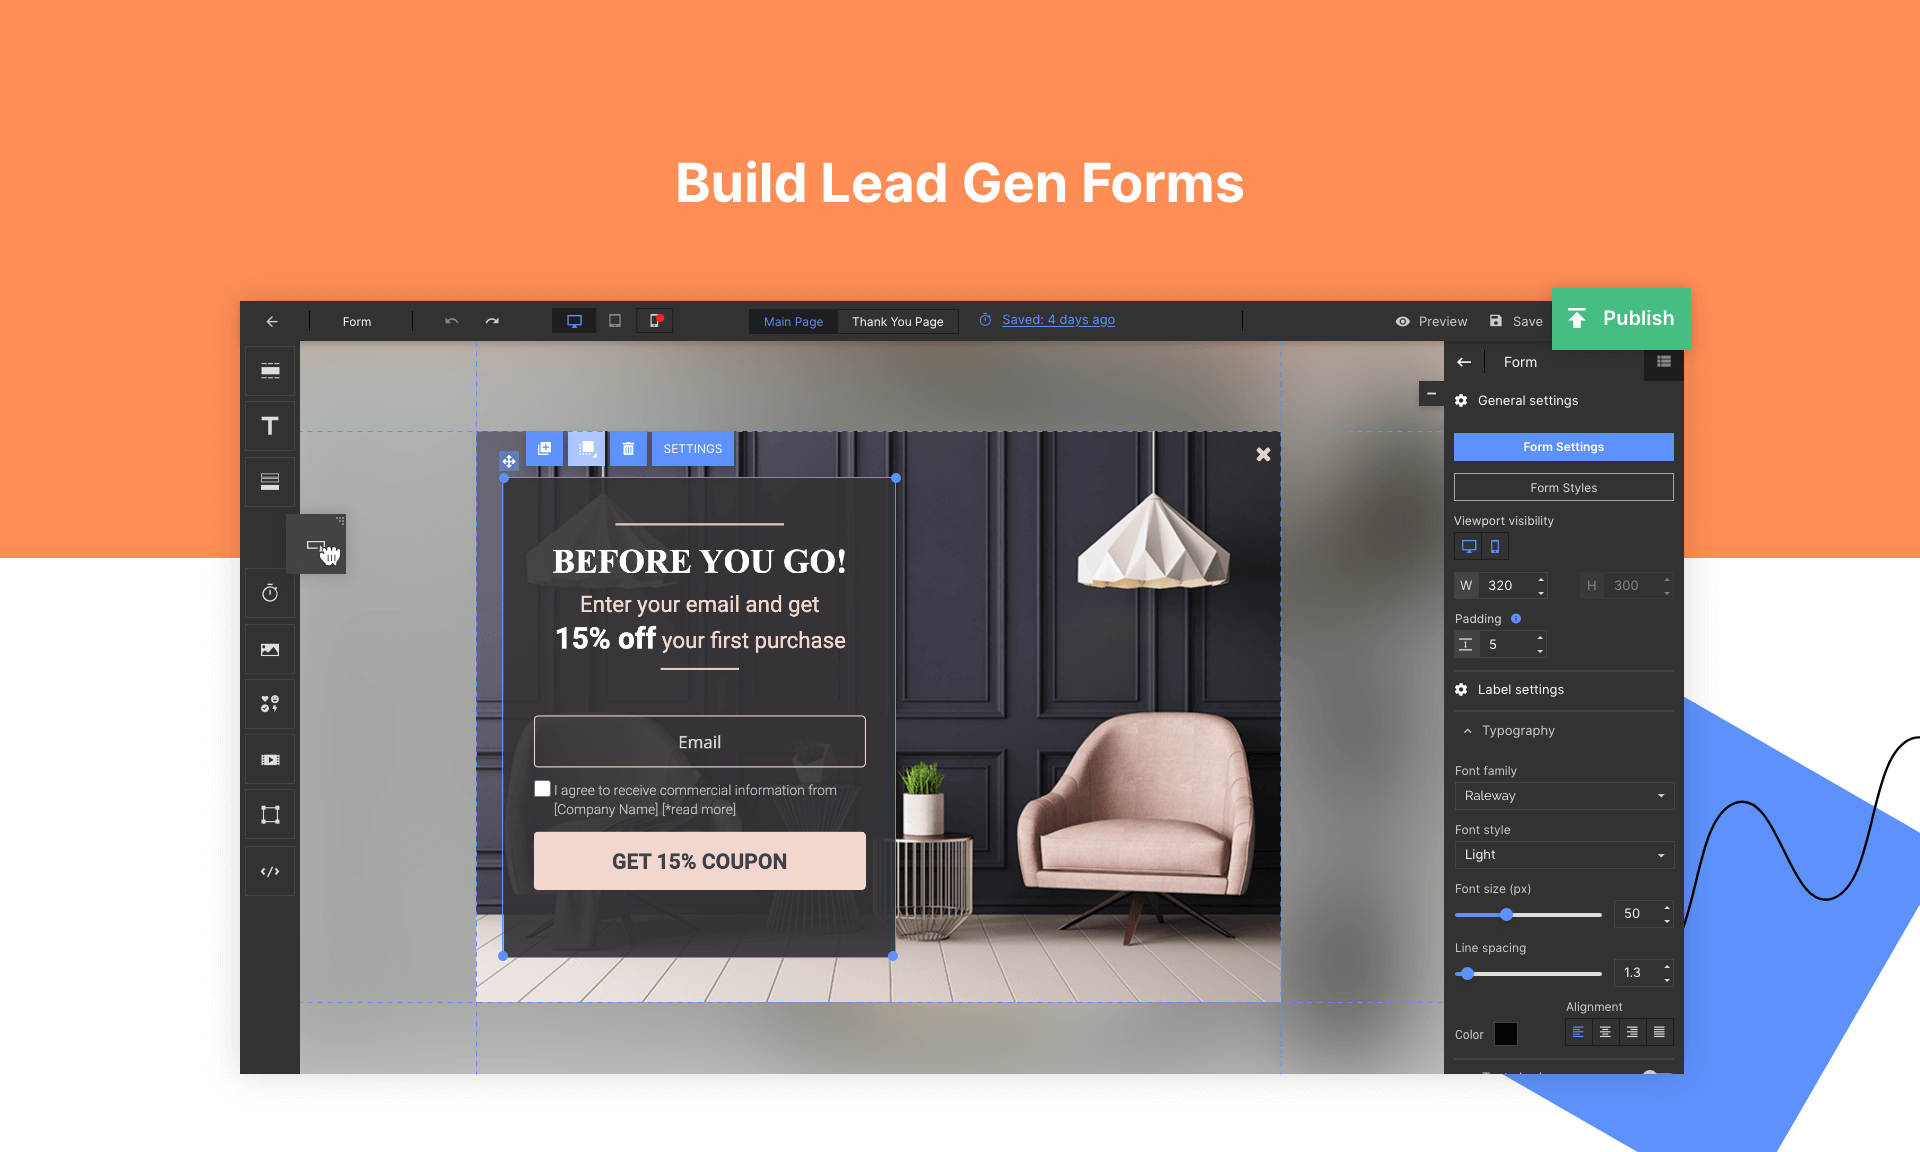 Build up lead-gen forms to acquire data directly on landing pages, make them part of funnels to manage a customer journey more effectively at each stage, integrate to your CRM and make the most out of your digital marketing campaigns.